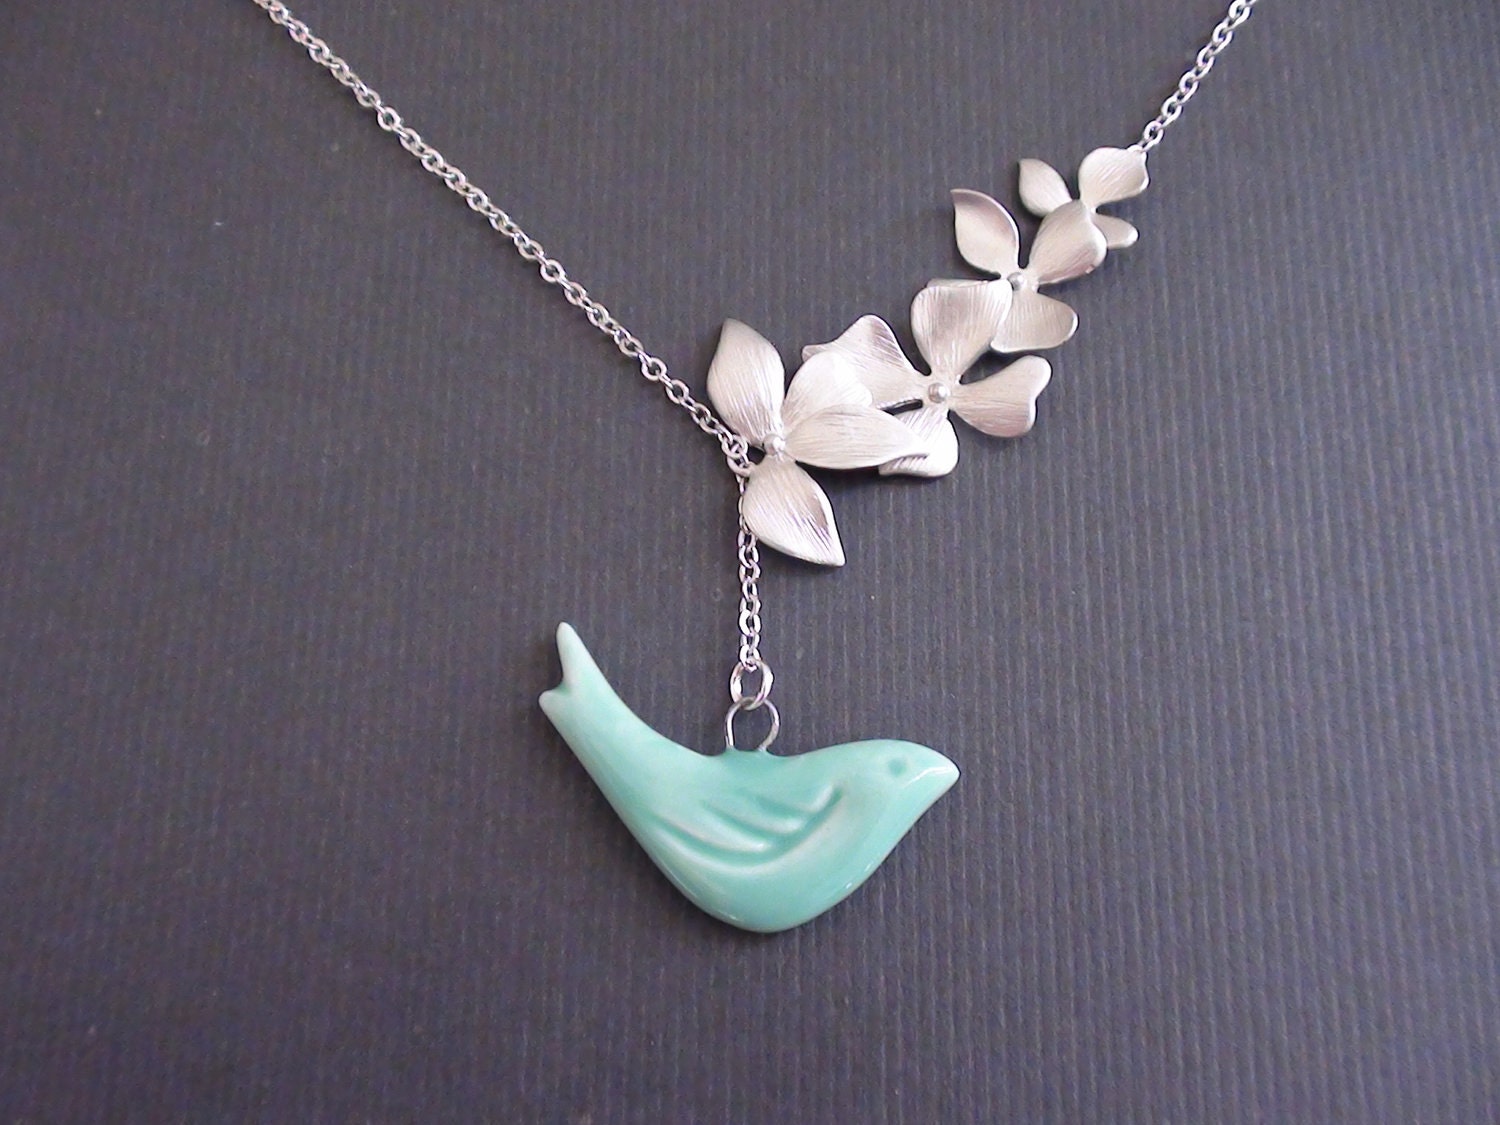 Sale 10% Off -Wild Orchid Flower Connector And Ceramic Mint Bird Pendant -16k White Gold Plated Lariat Necklace